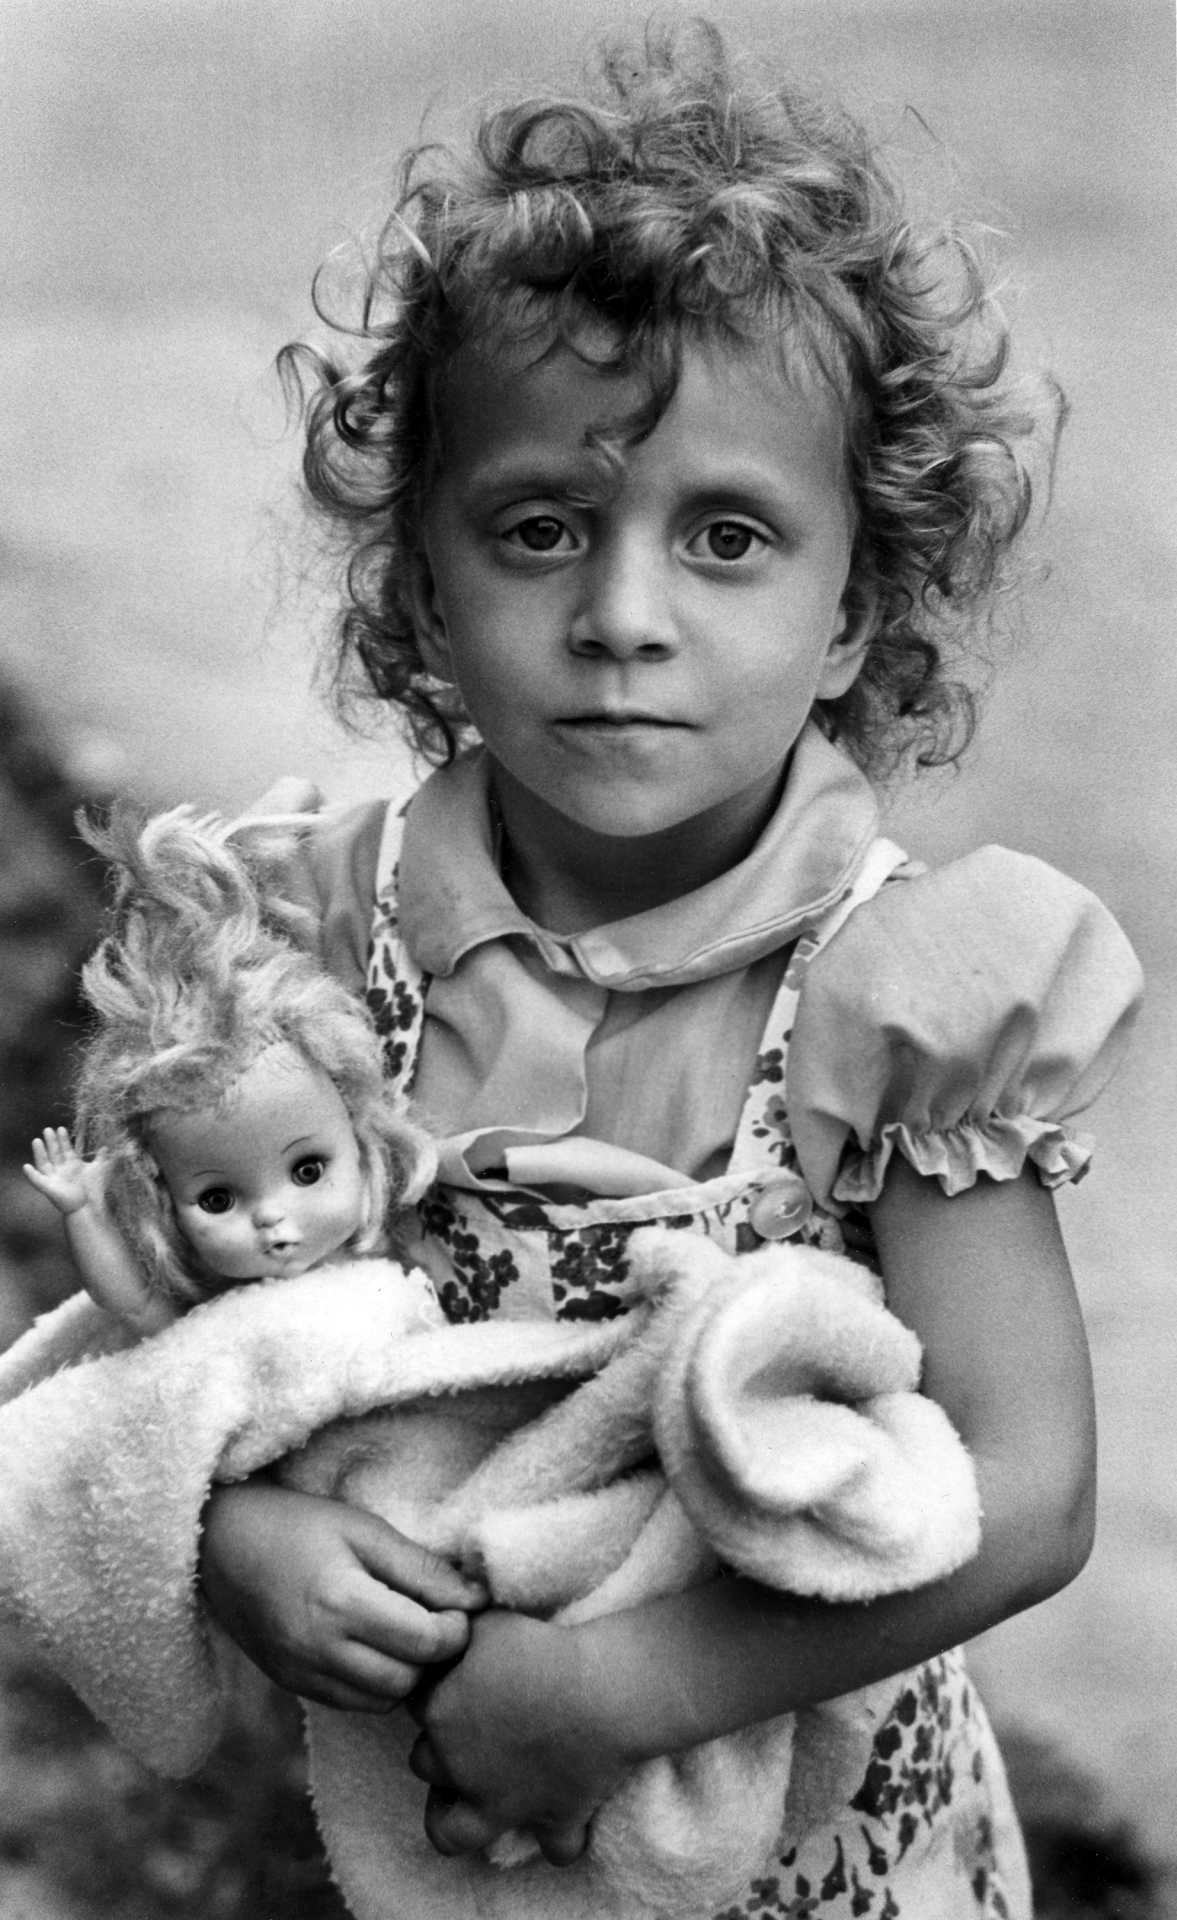 A little girl with her doll. 1970’s